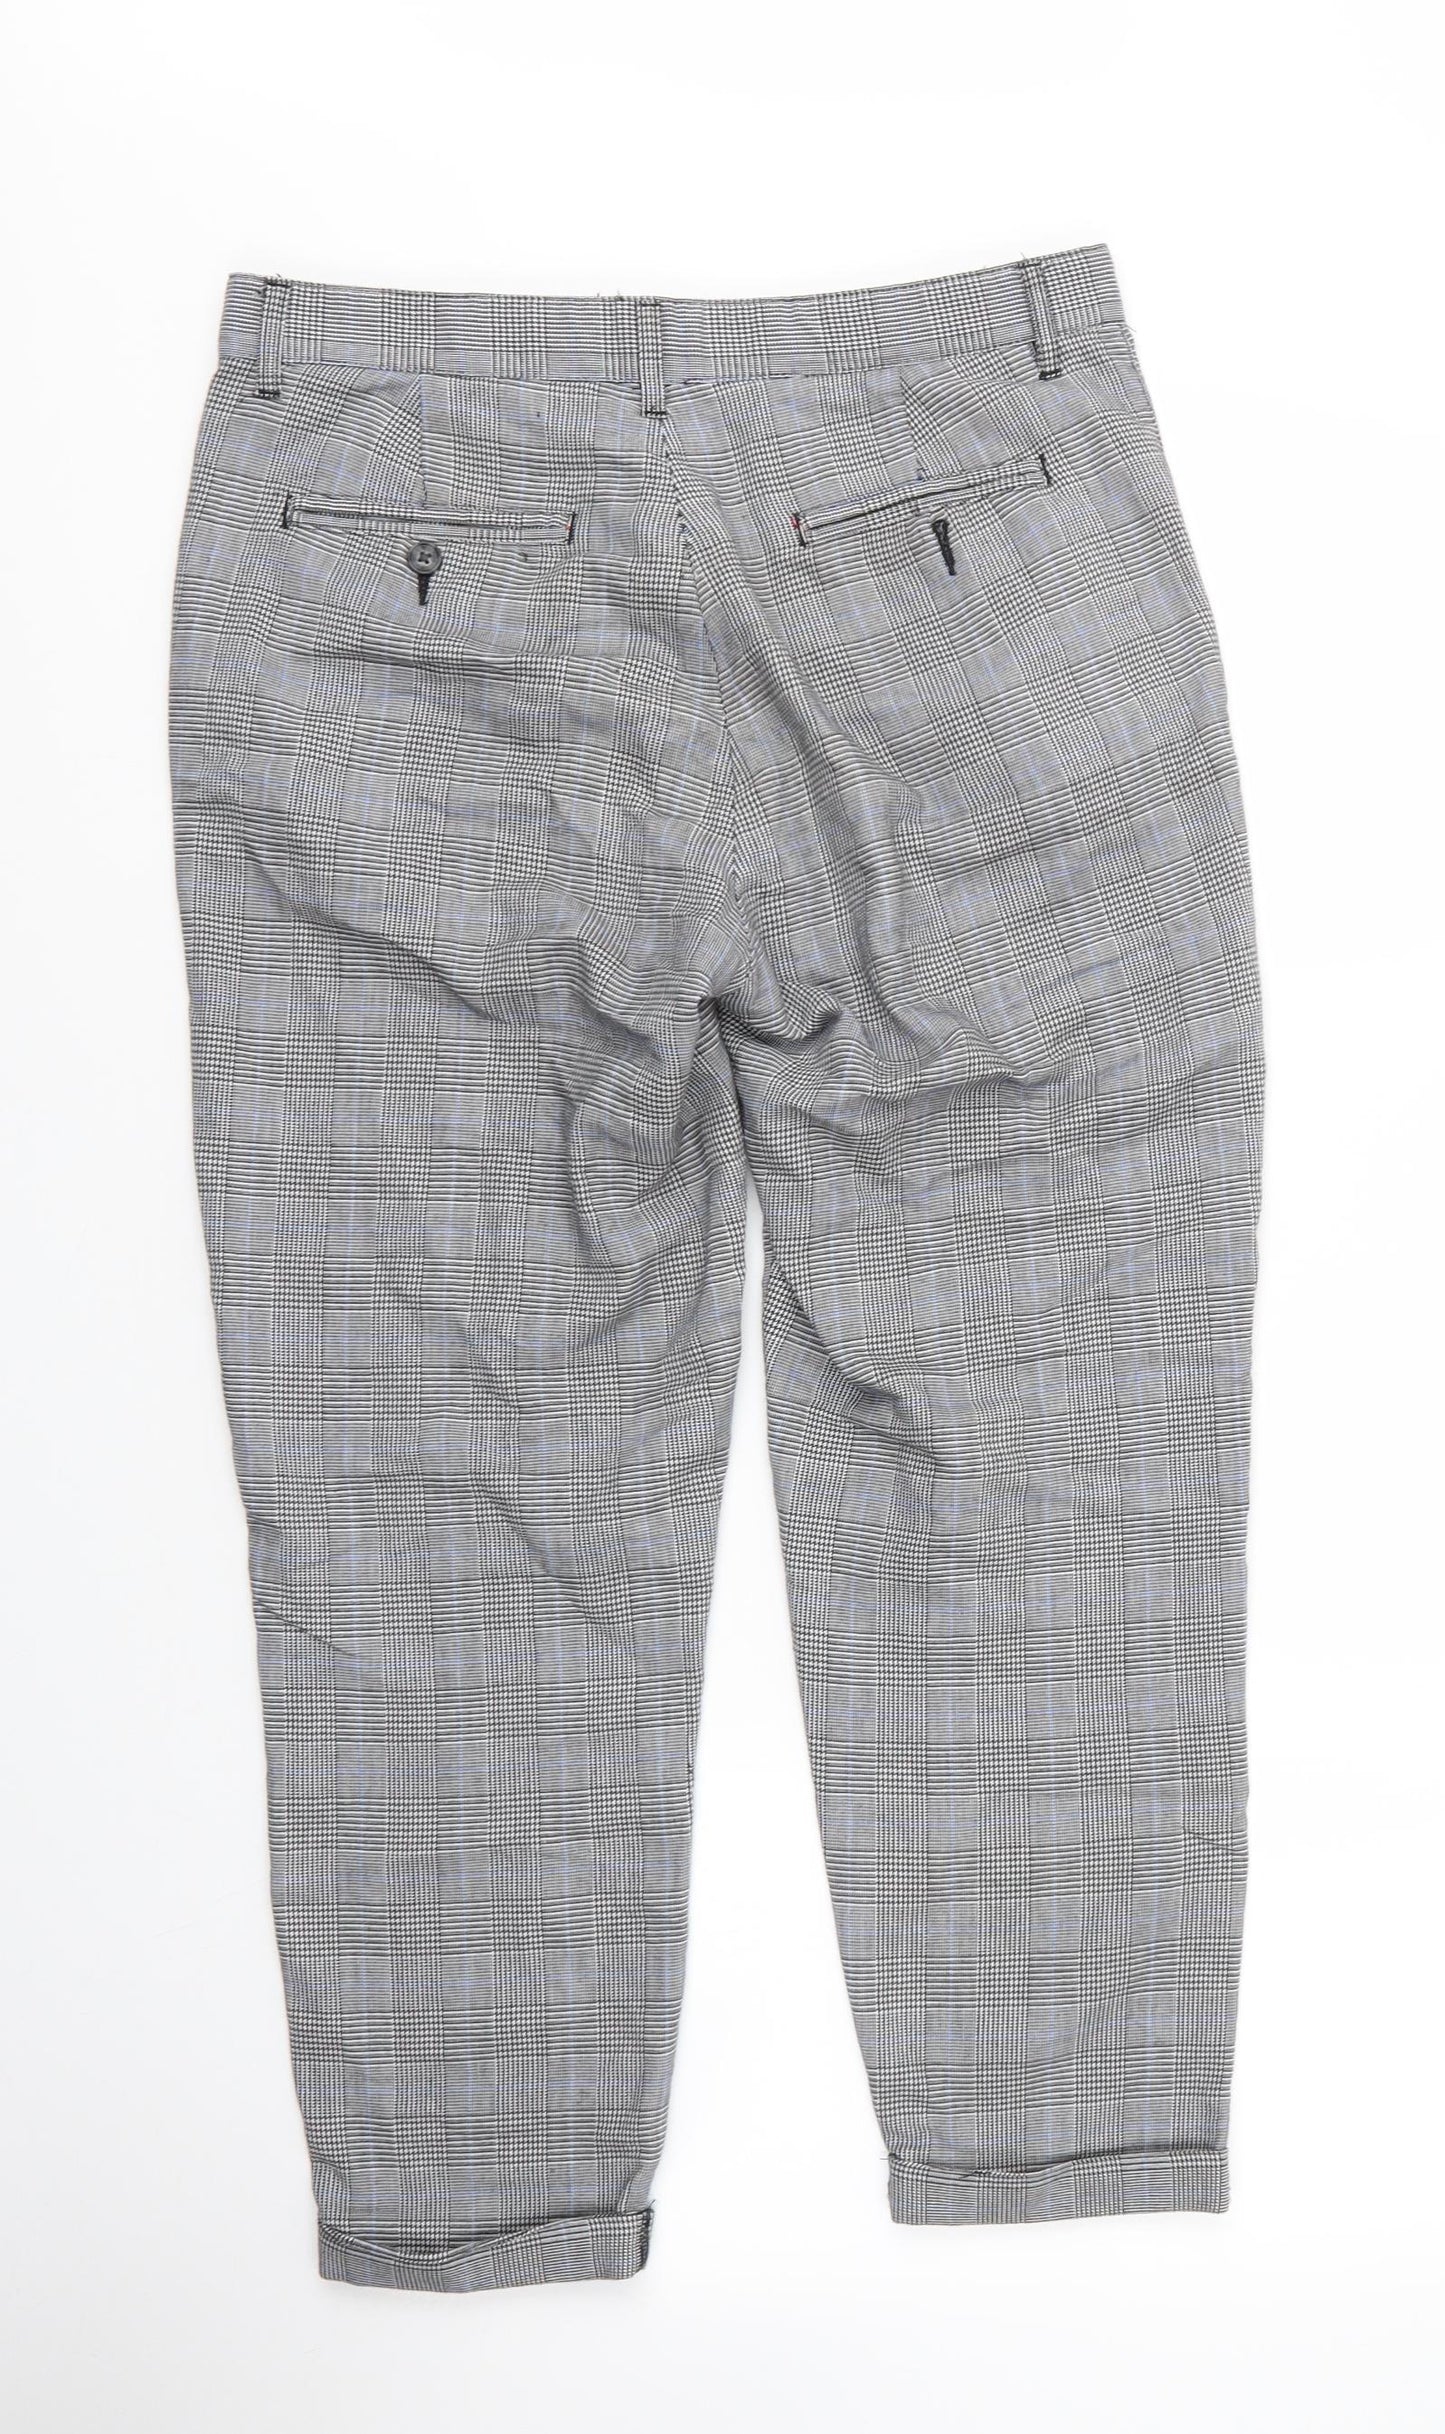 ONLY & SONS Womens Grey Plaid Viscose Capri Trousers Size 8 L25 in Regular Zip